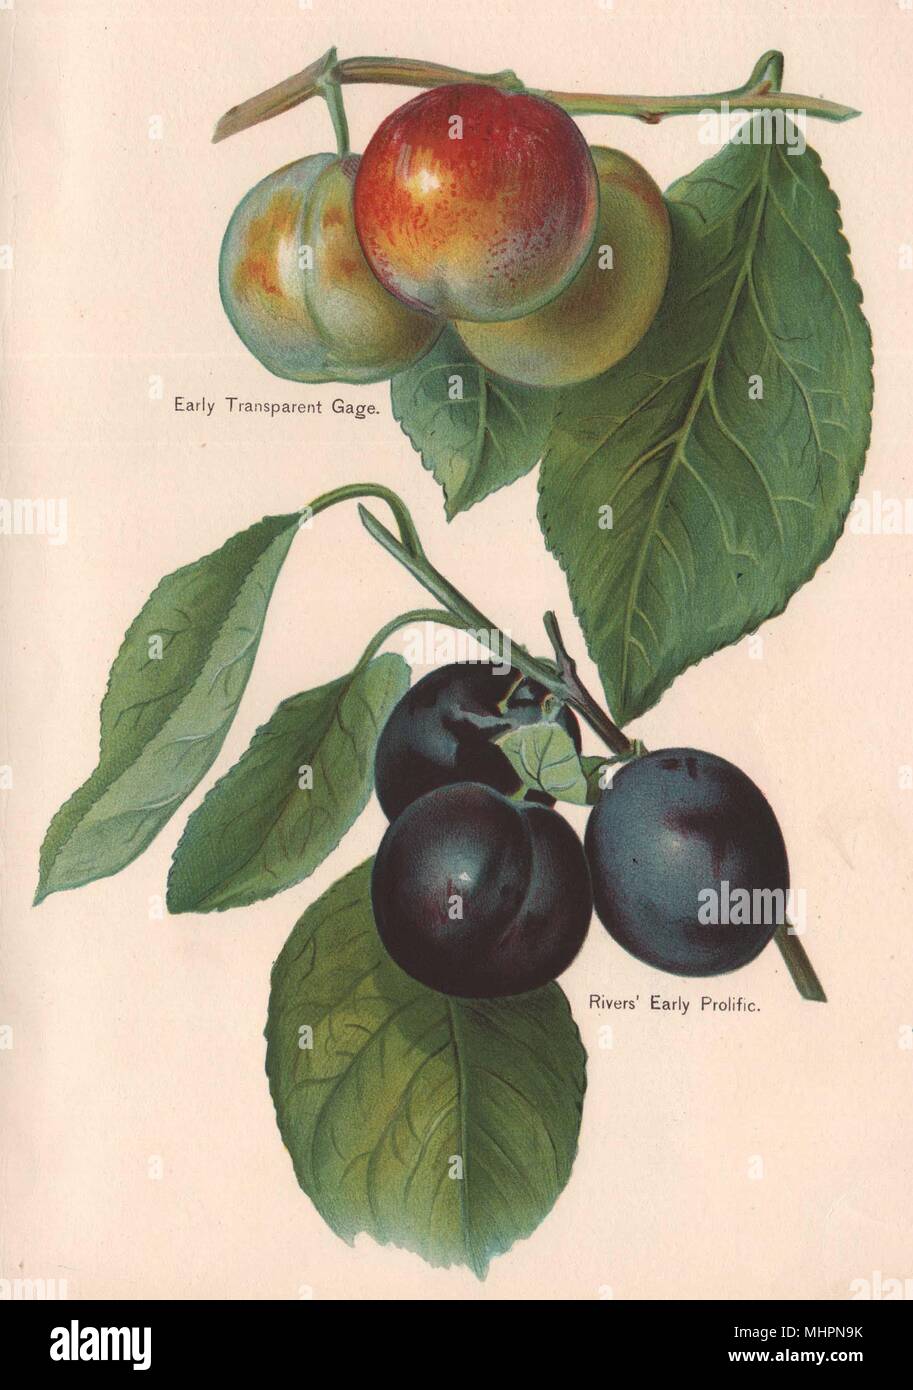 PLUMS. Early Transparent Gage; Rivers' Early Prolific. WRIGHT Chromolitho 1892 Stock Photo